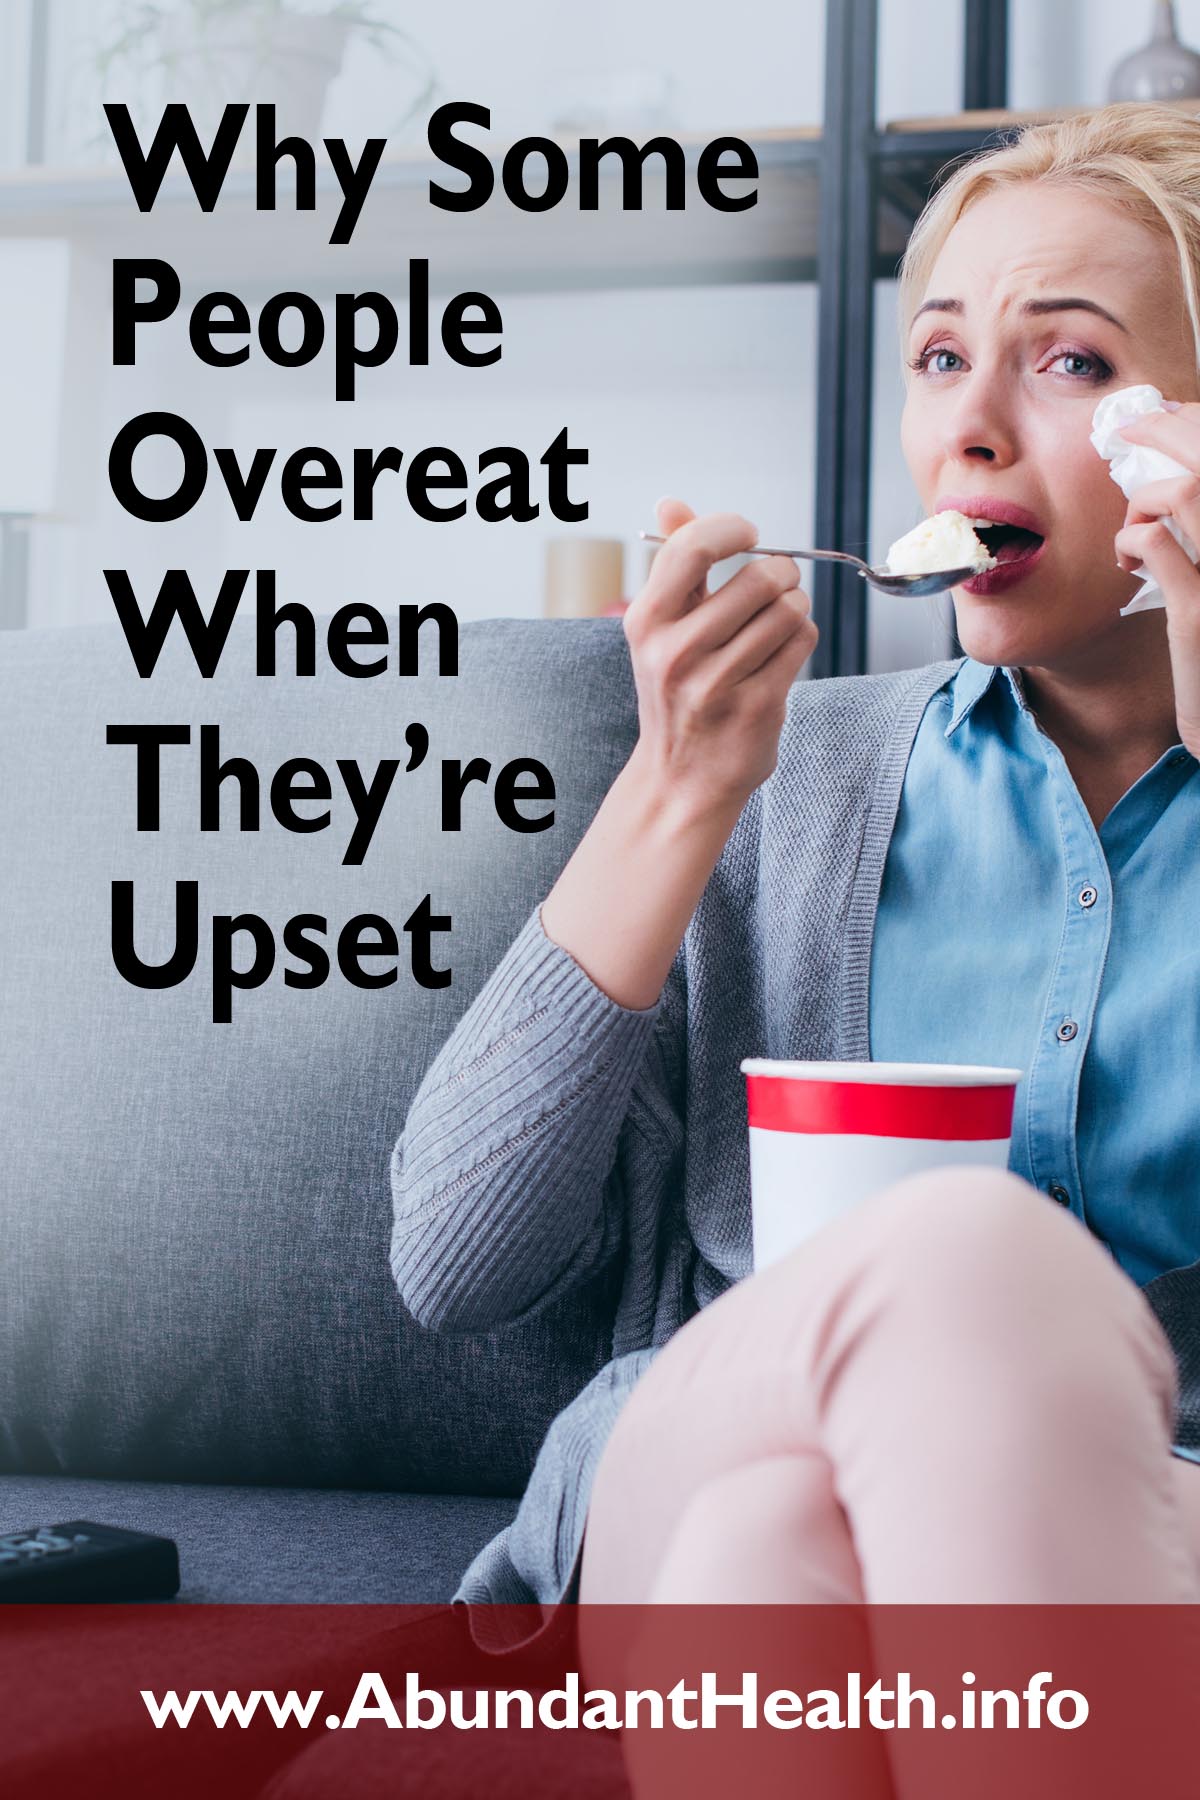 Why Some People Overeat When They’re Upset